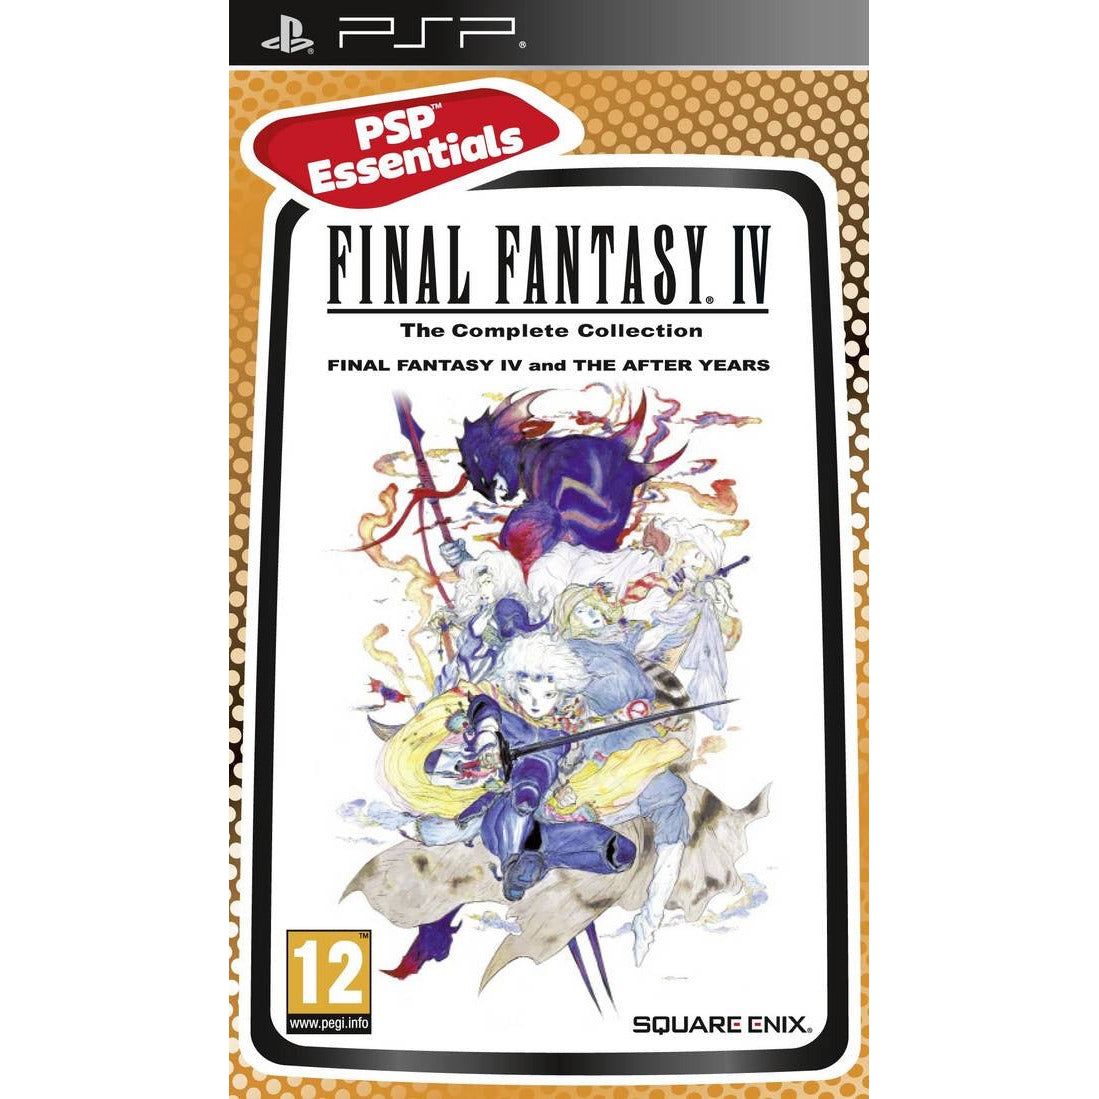 PSP - Final Fantasy IV The Complete Collection (In Case) (PAL)